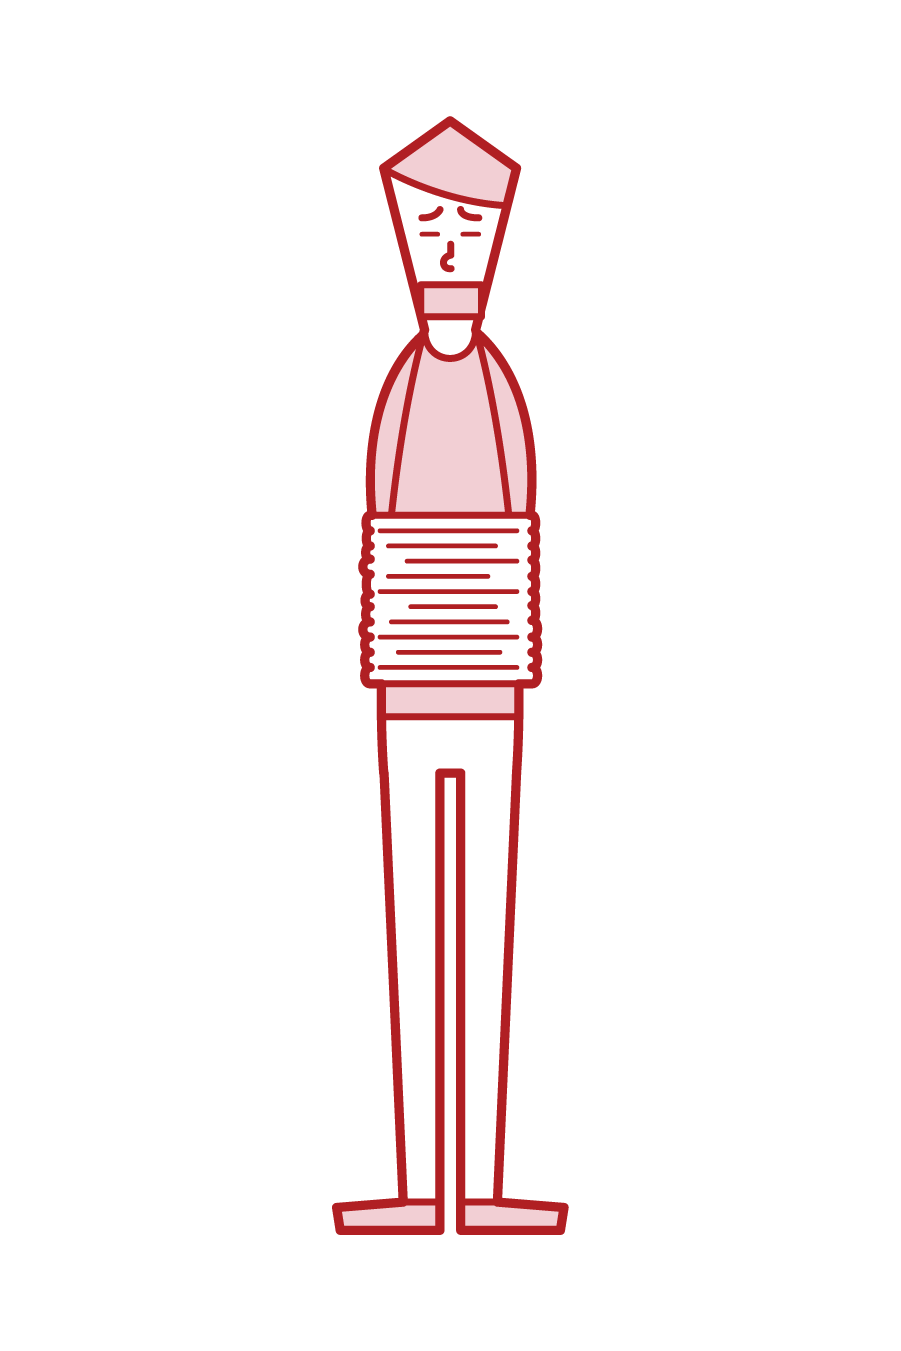 Illustration of abducted person (man)